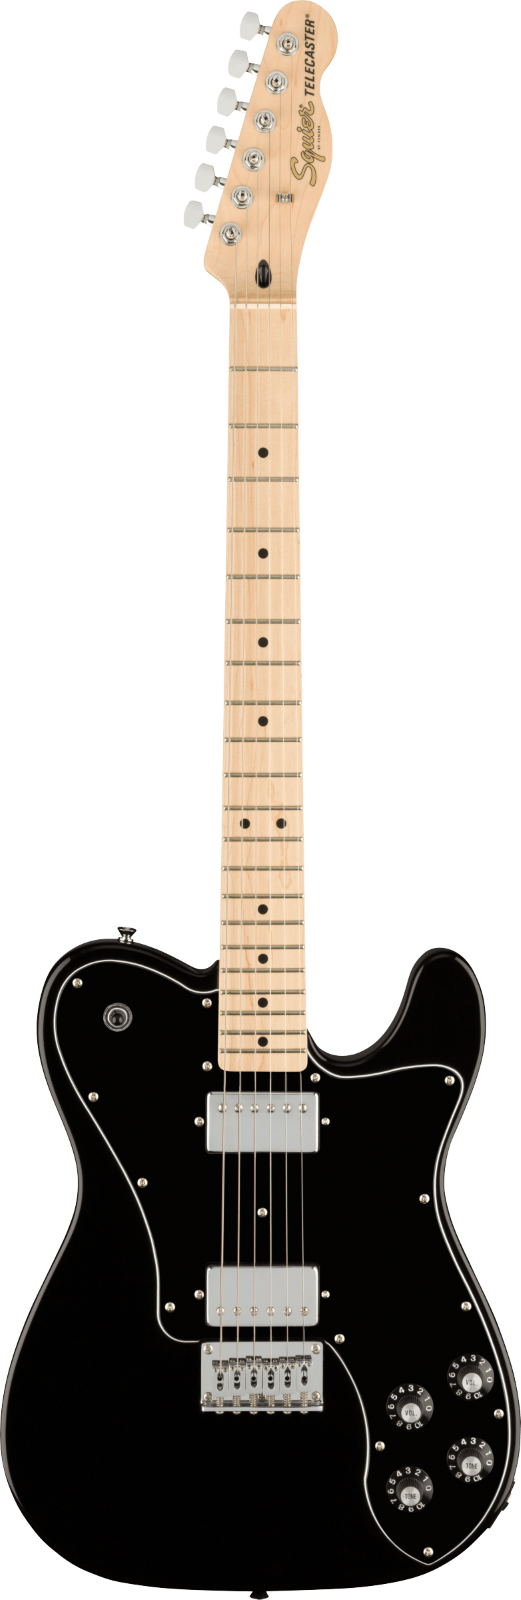 Squier Affinity Series Telecaster Deluxe, Maple Fingerboard, Black Pickguard, Black : photo 1